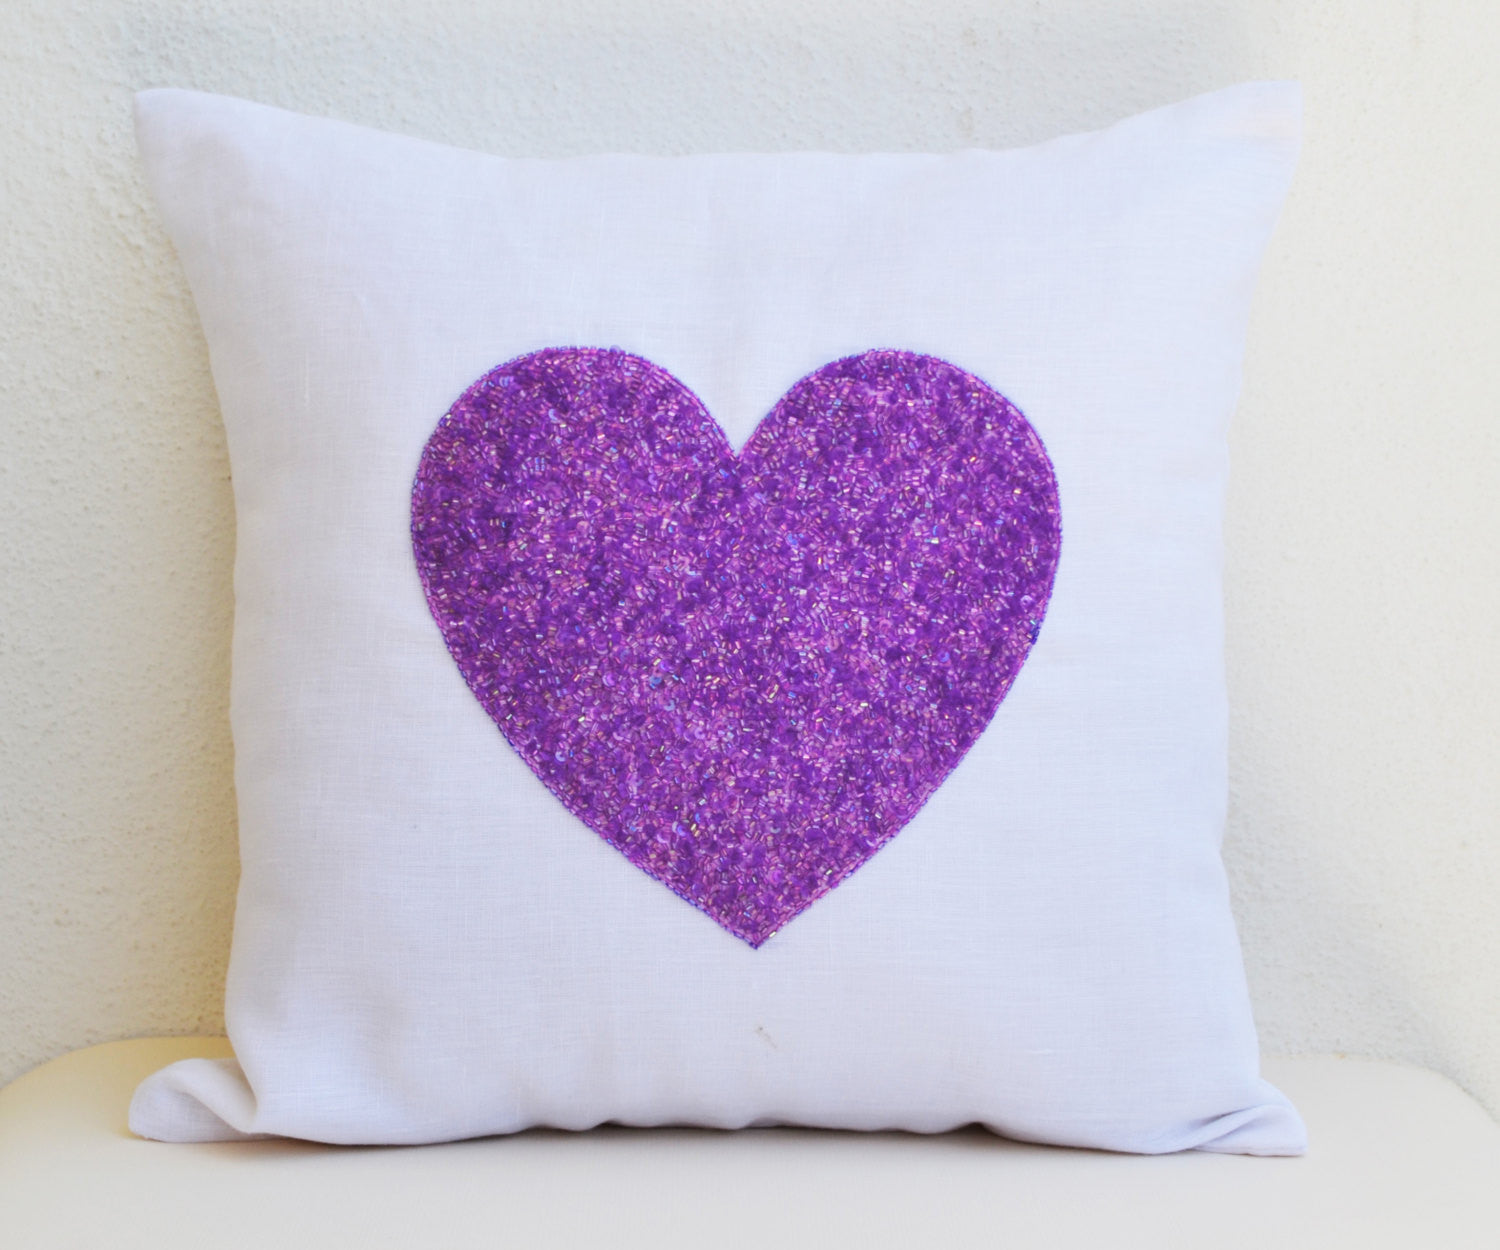  Handmade white linen pillow cover with purple sequin